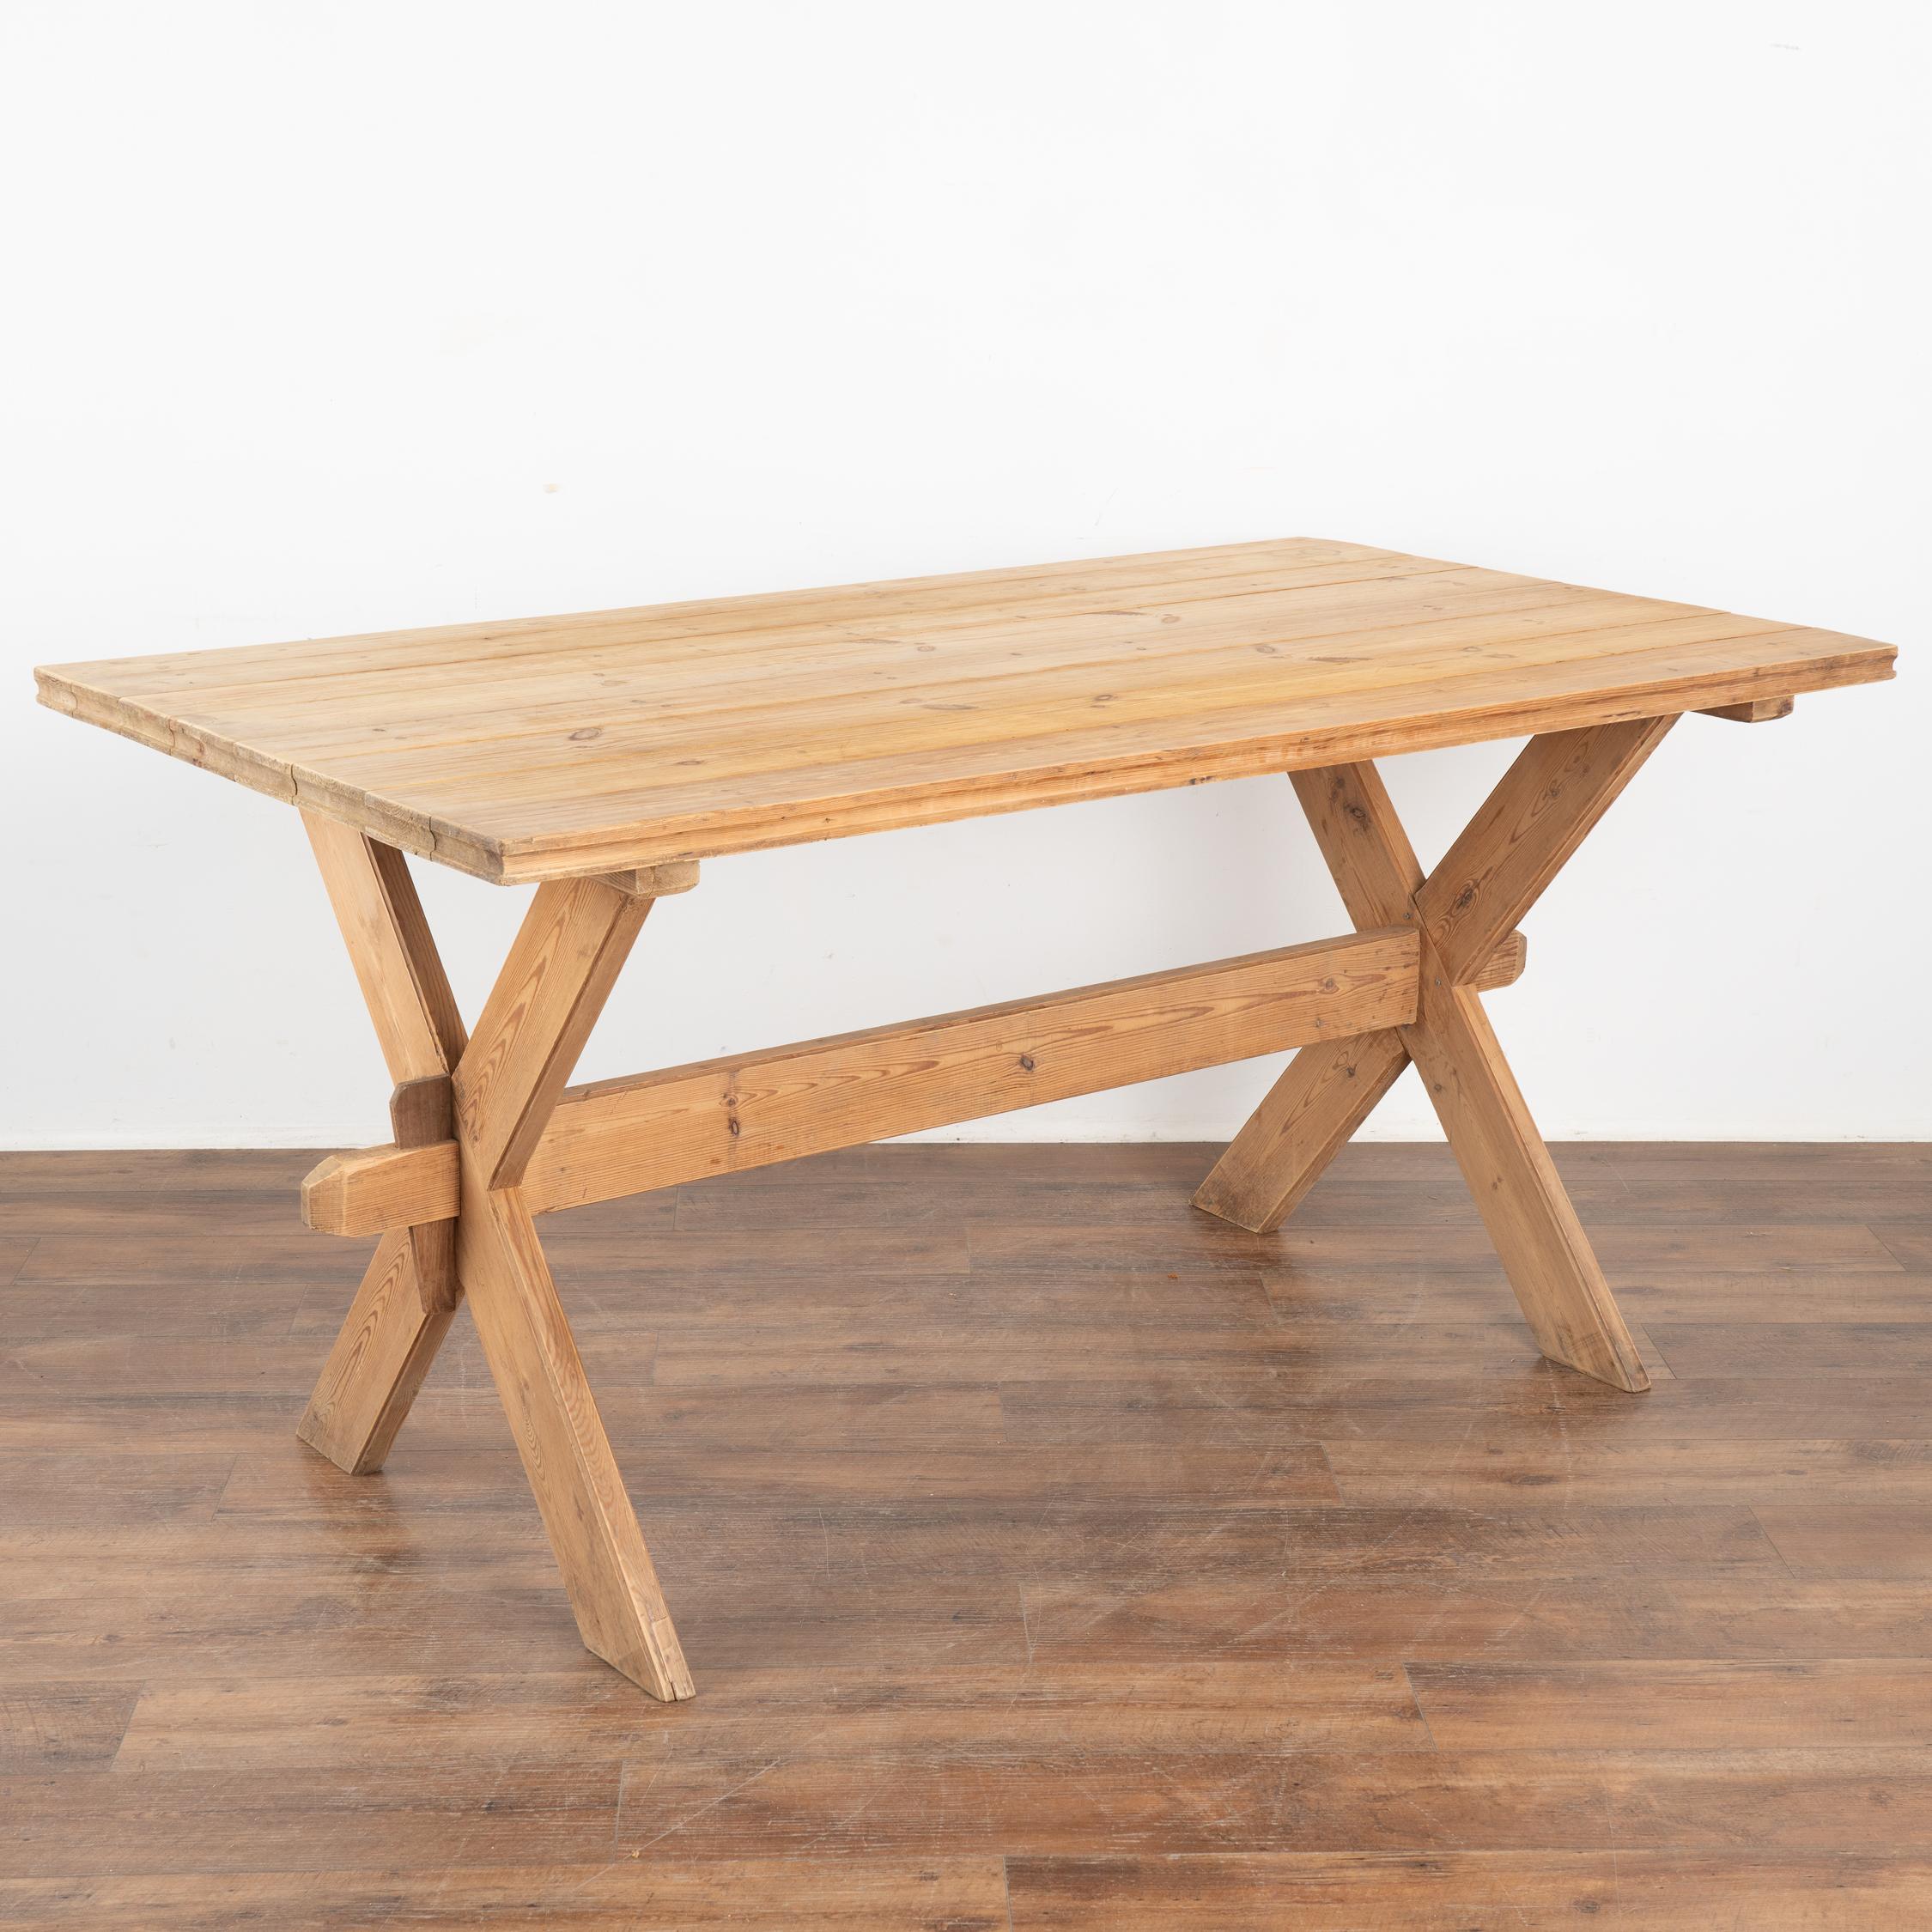 This farmhouse kitchen or dining table has European country charm thanks to the unique X-stretcher base.
The natural pine has been distressed through generations of use, adding depth to the character of the table. The many scratches, dings, stains